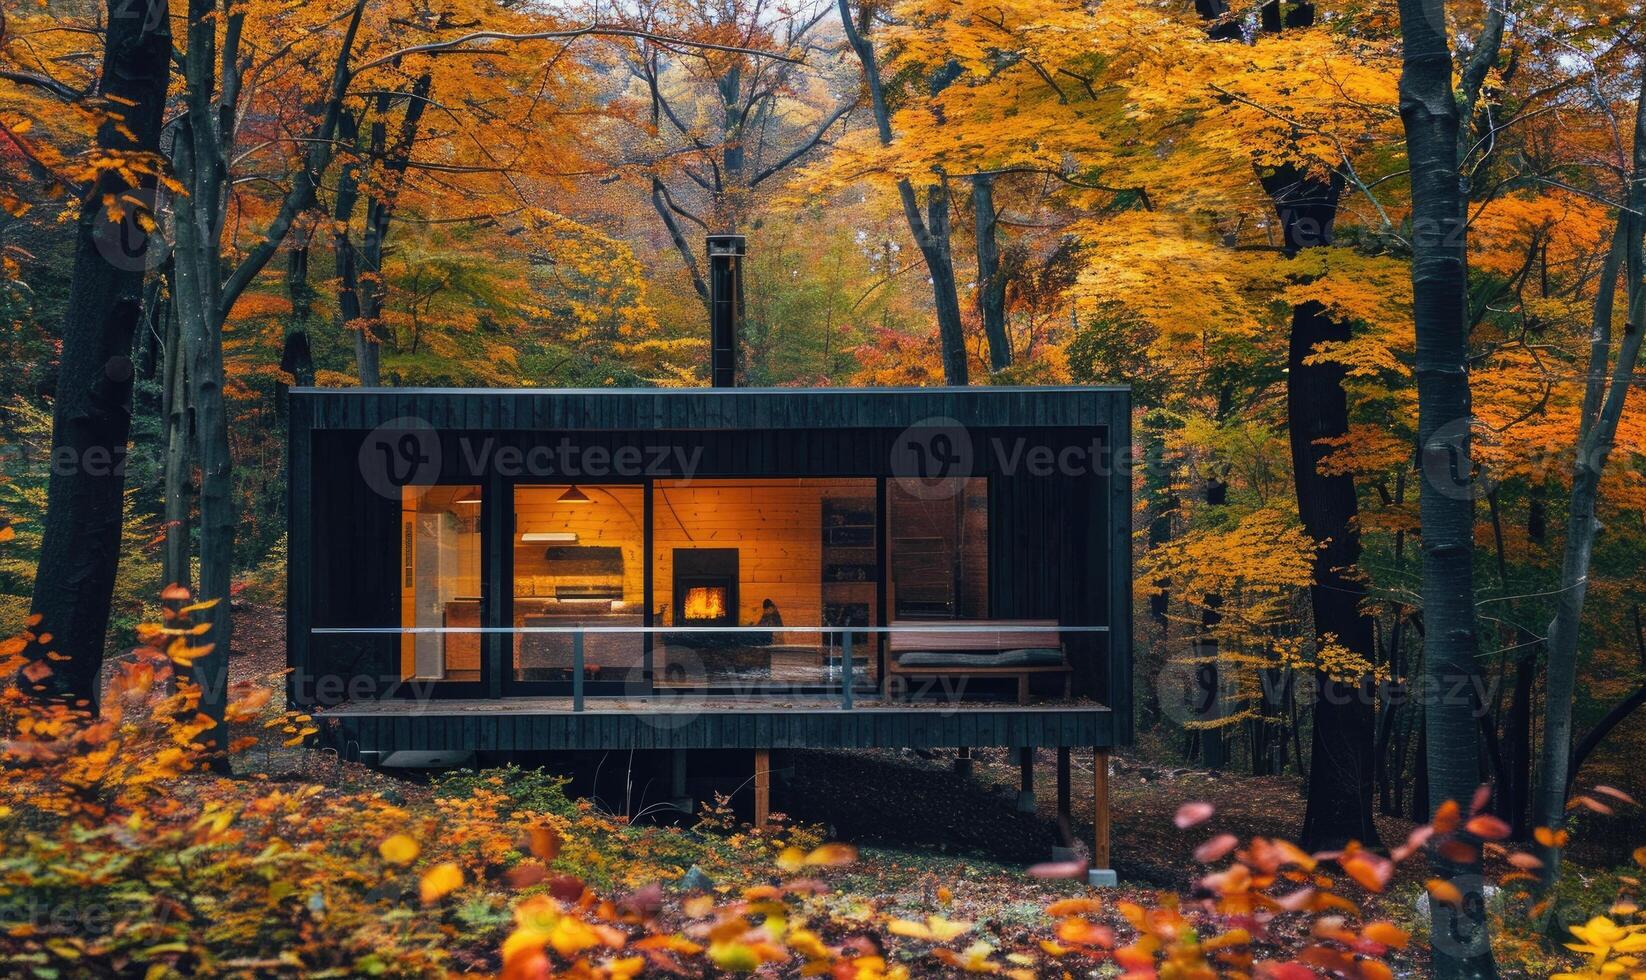 A cozy modern wooden cabin surrounded by colorful autumn foliage photo